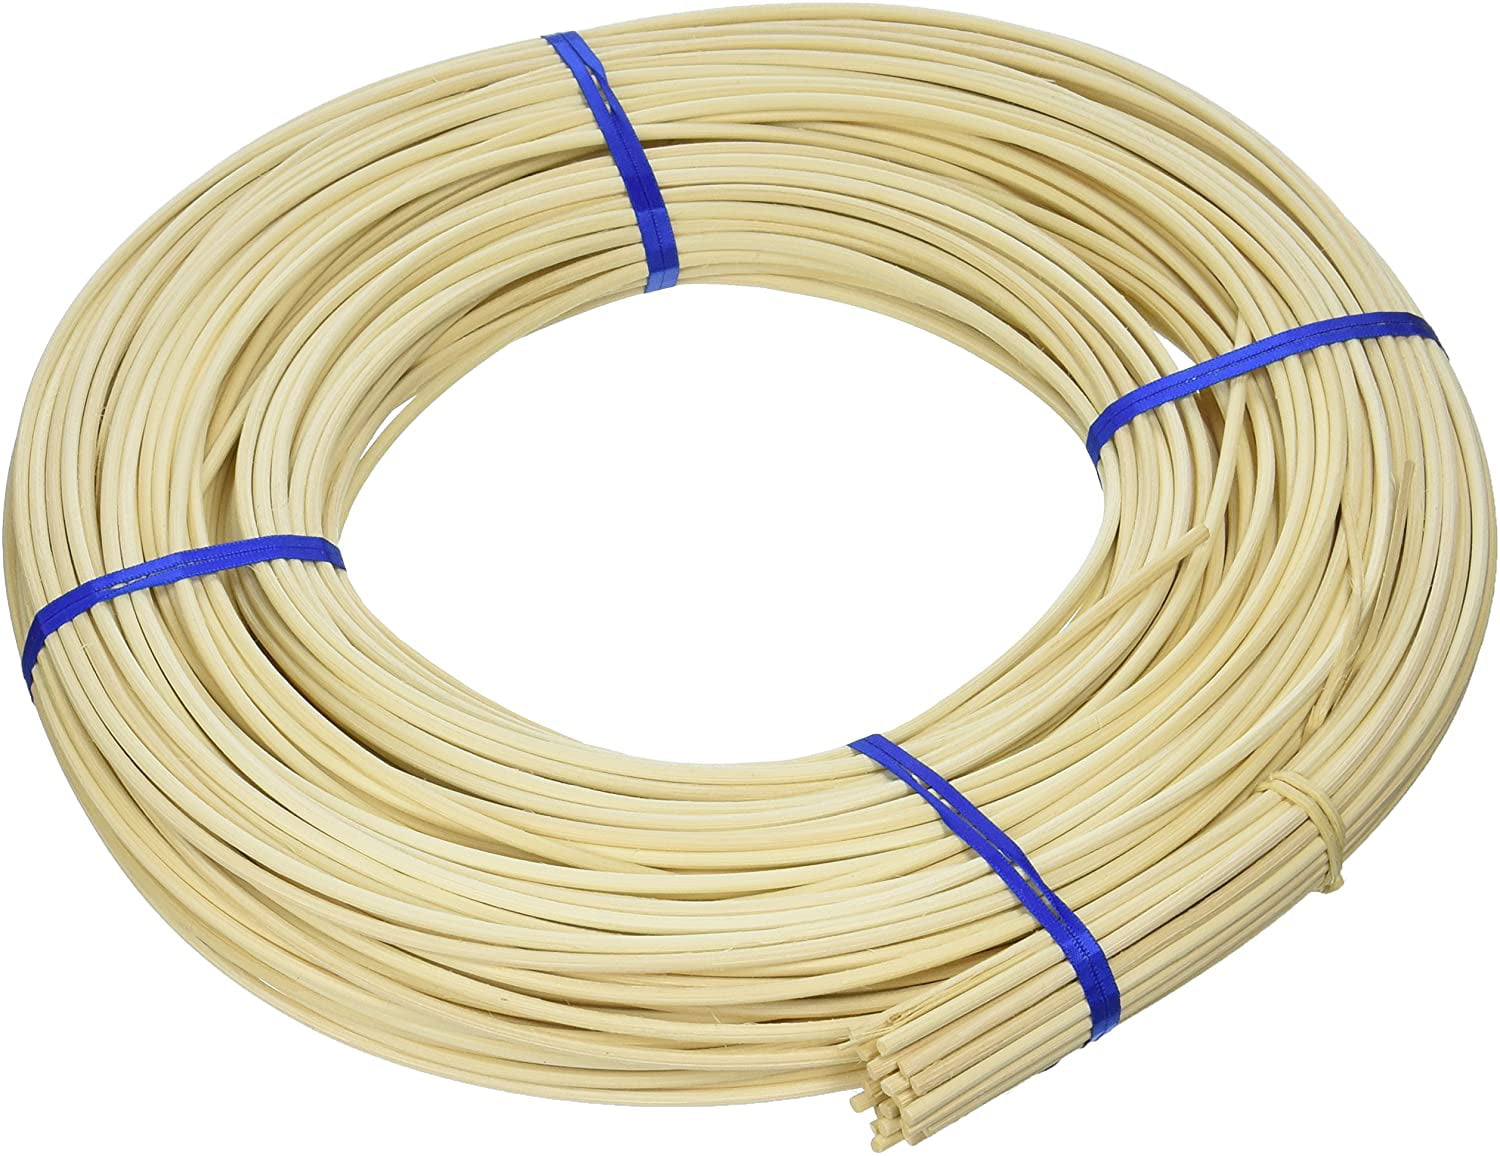 Commonwealth Basket FR632K2 Fibre Rush 6/32-Inch 2-Pound Coil - Pack of 2 Kraft Approximately 210-Feet